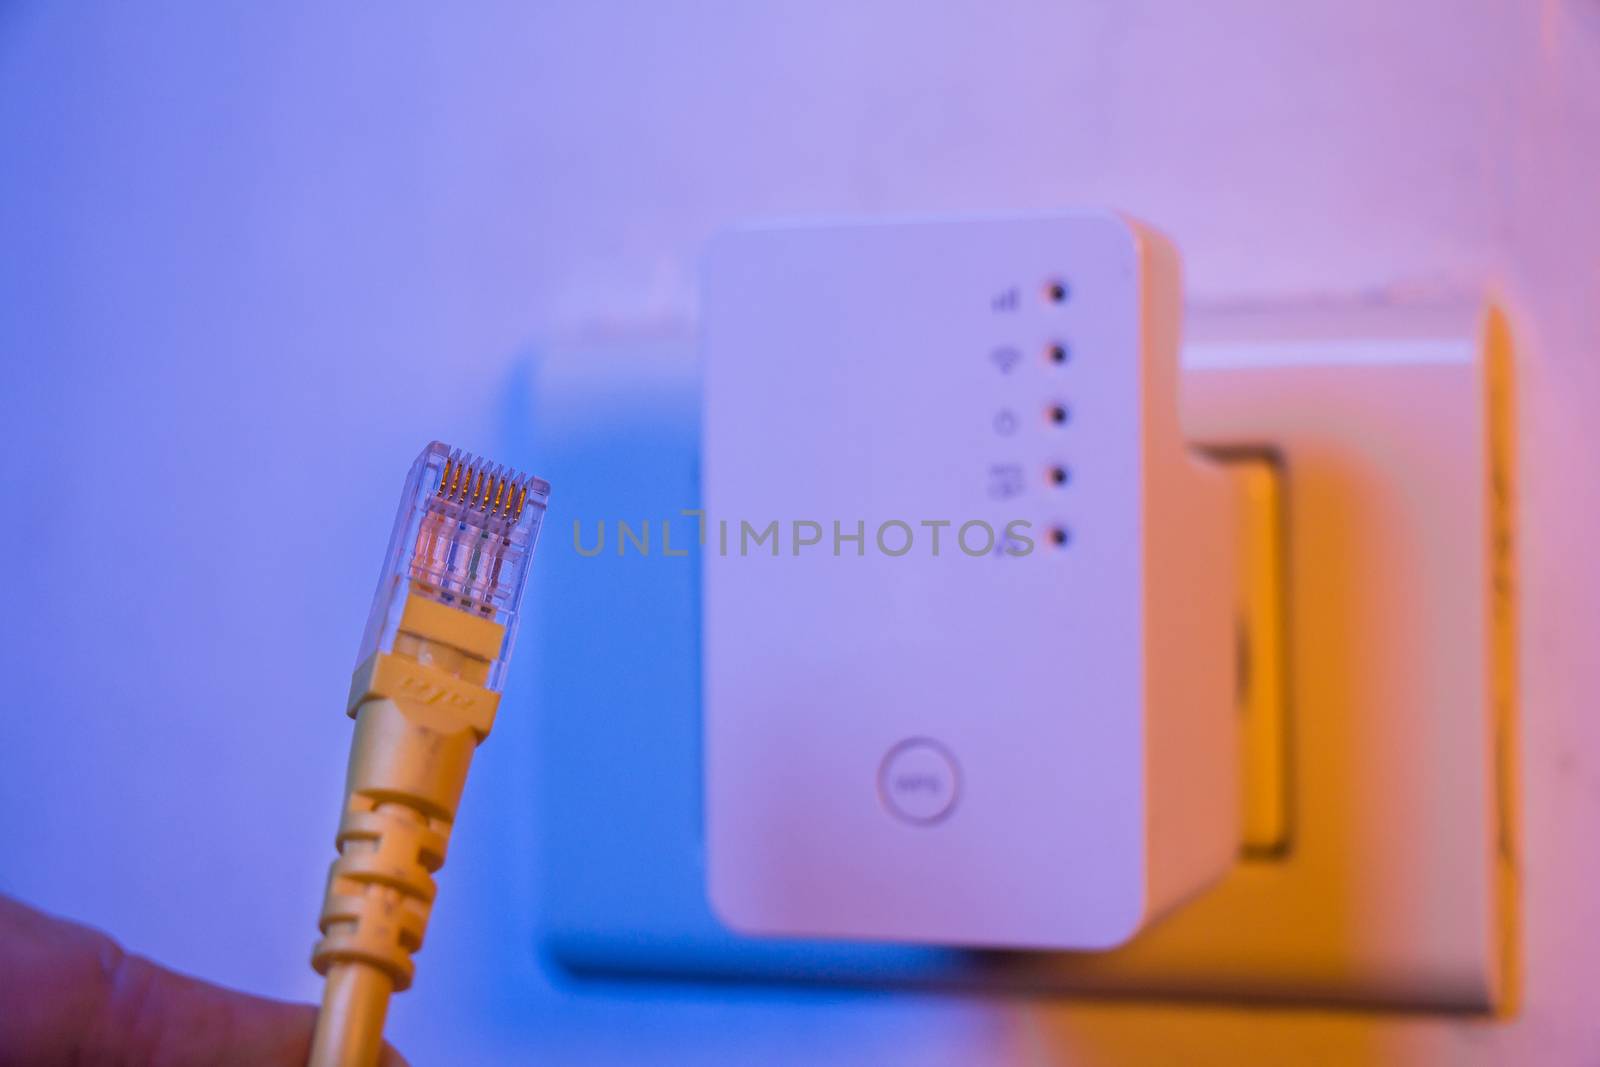 Closeup of ethernet cable. WiFi extender device in electrical socket on the wall on the background. The device is in access point mode that help to extend wireless network in home or office.